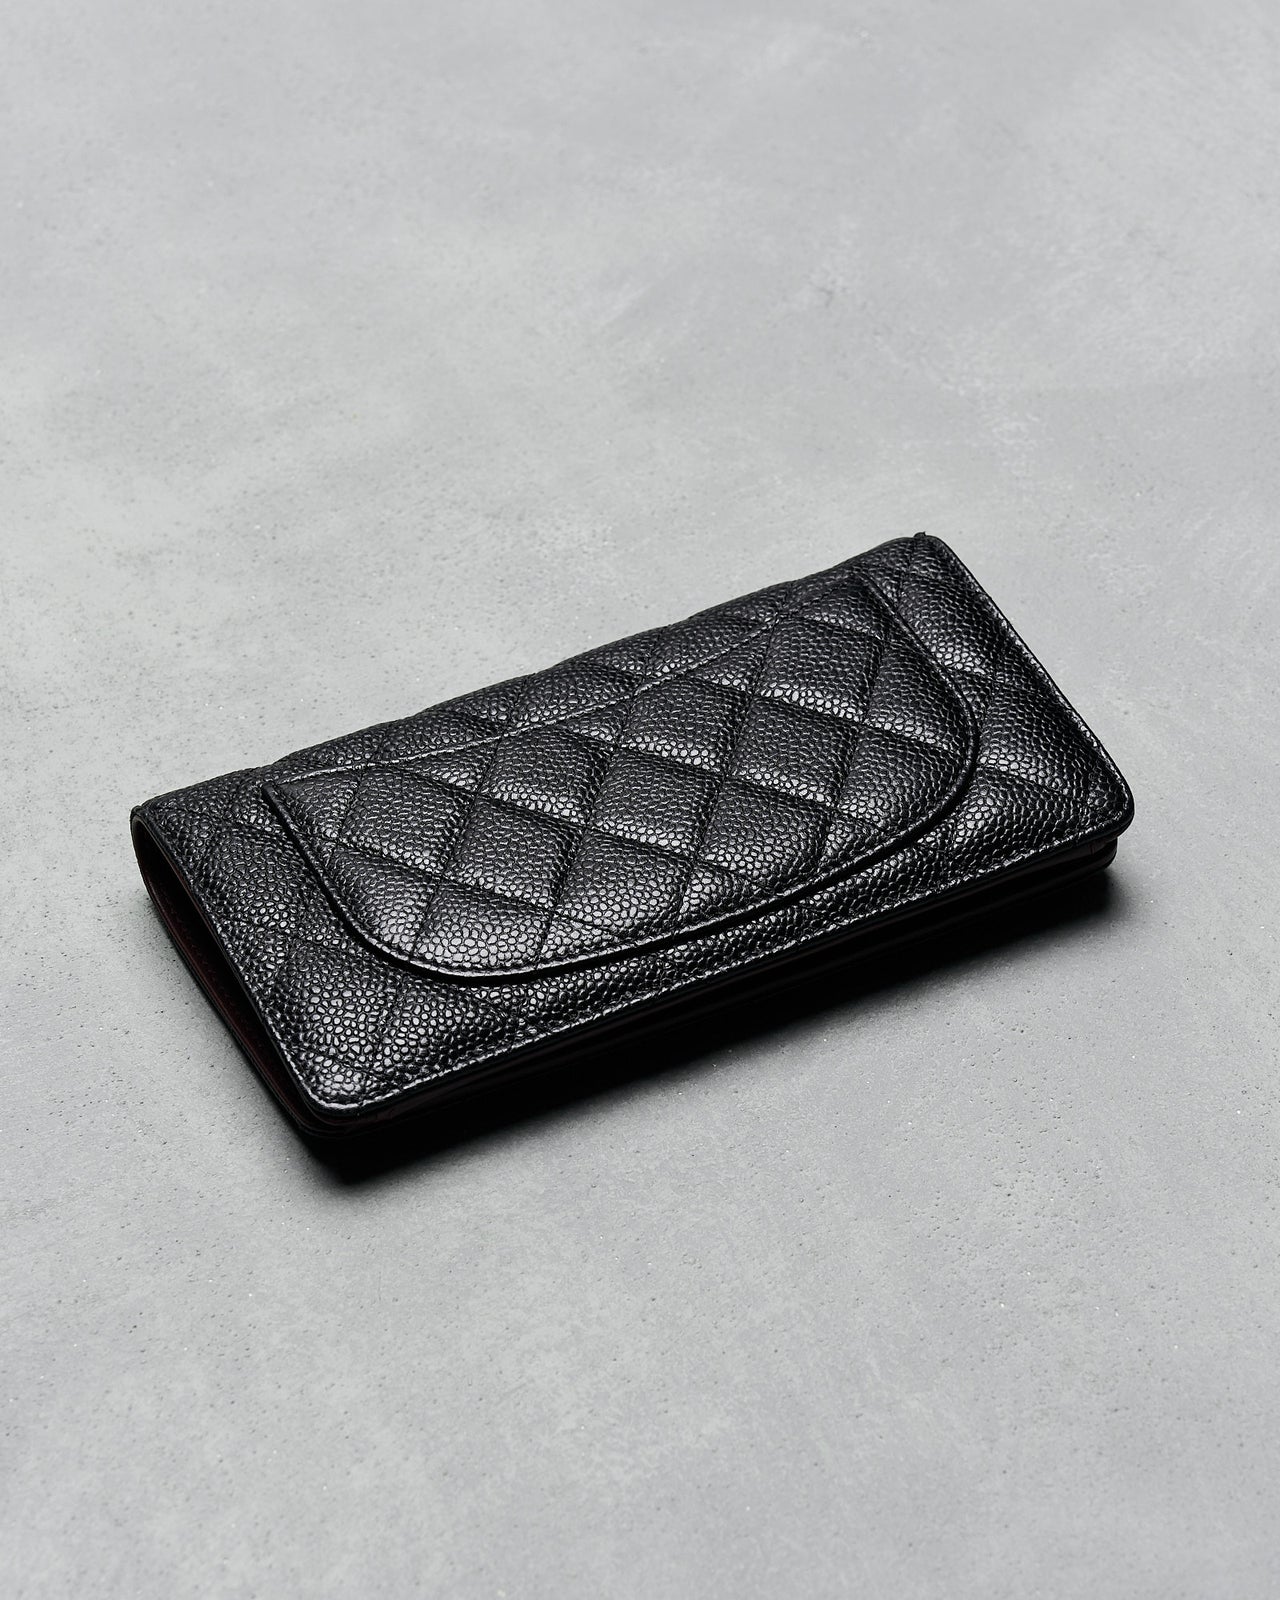 Chanel 2016 Quilted Cavier long bifold wallet